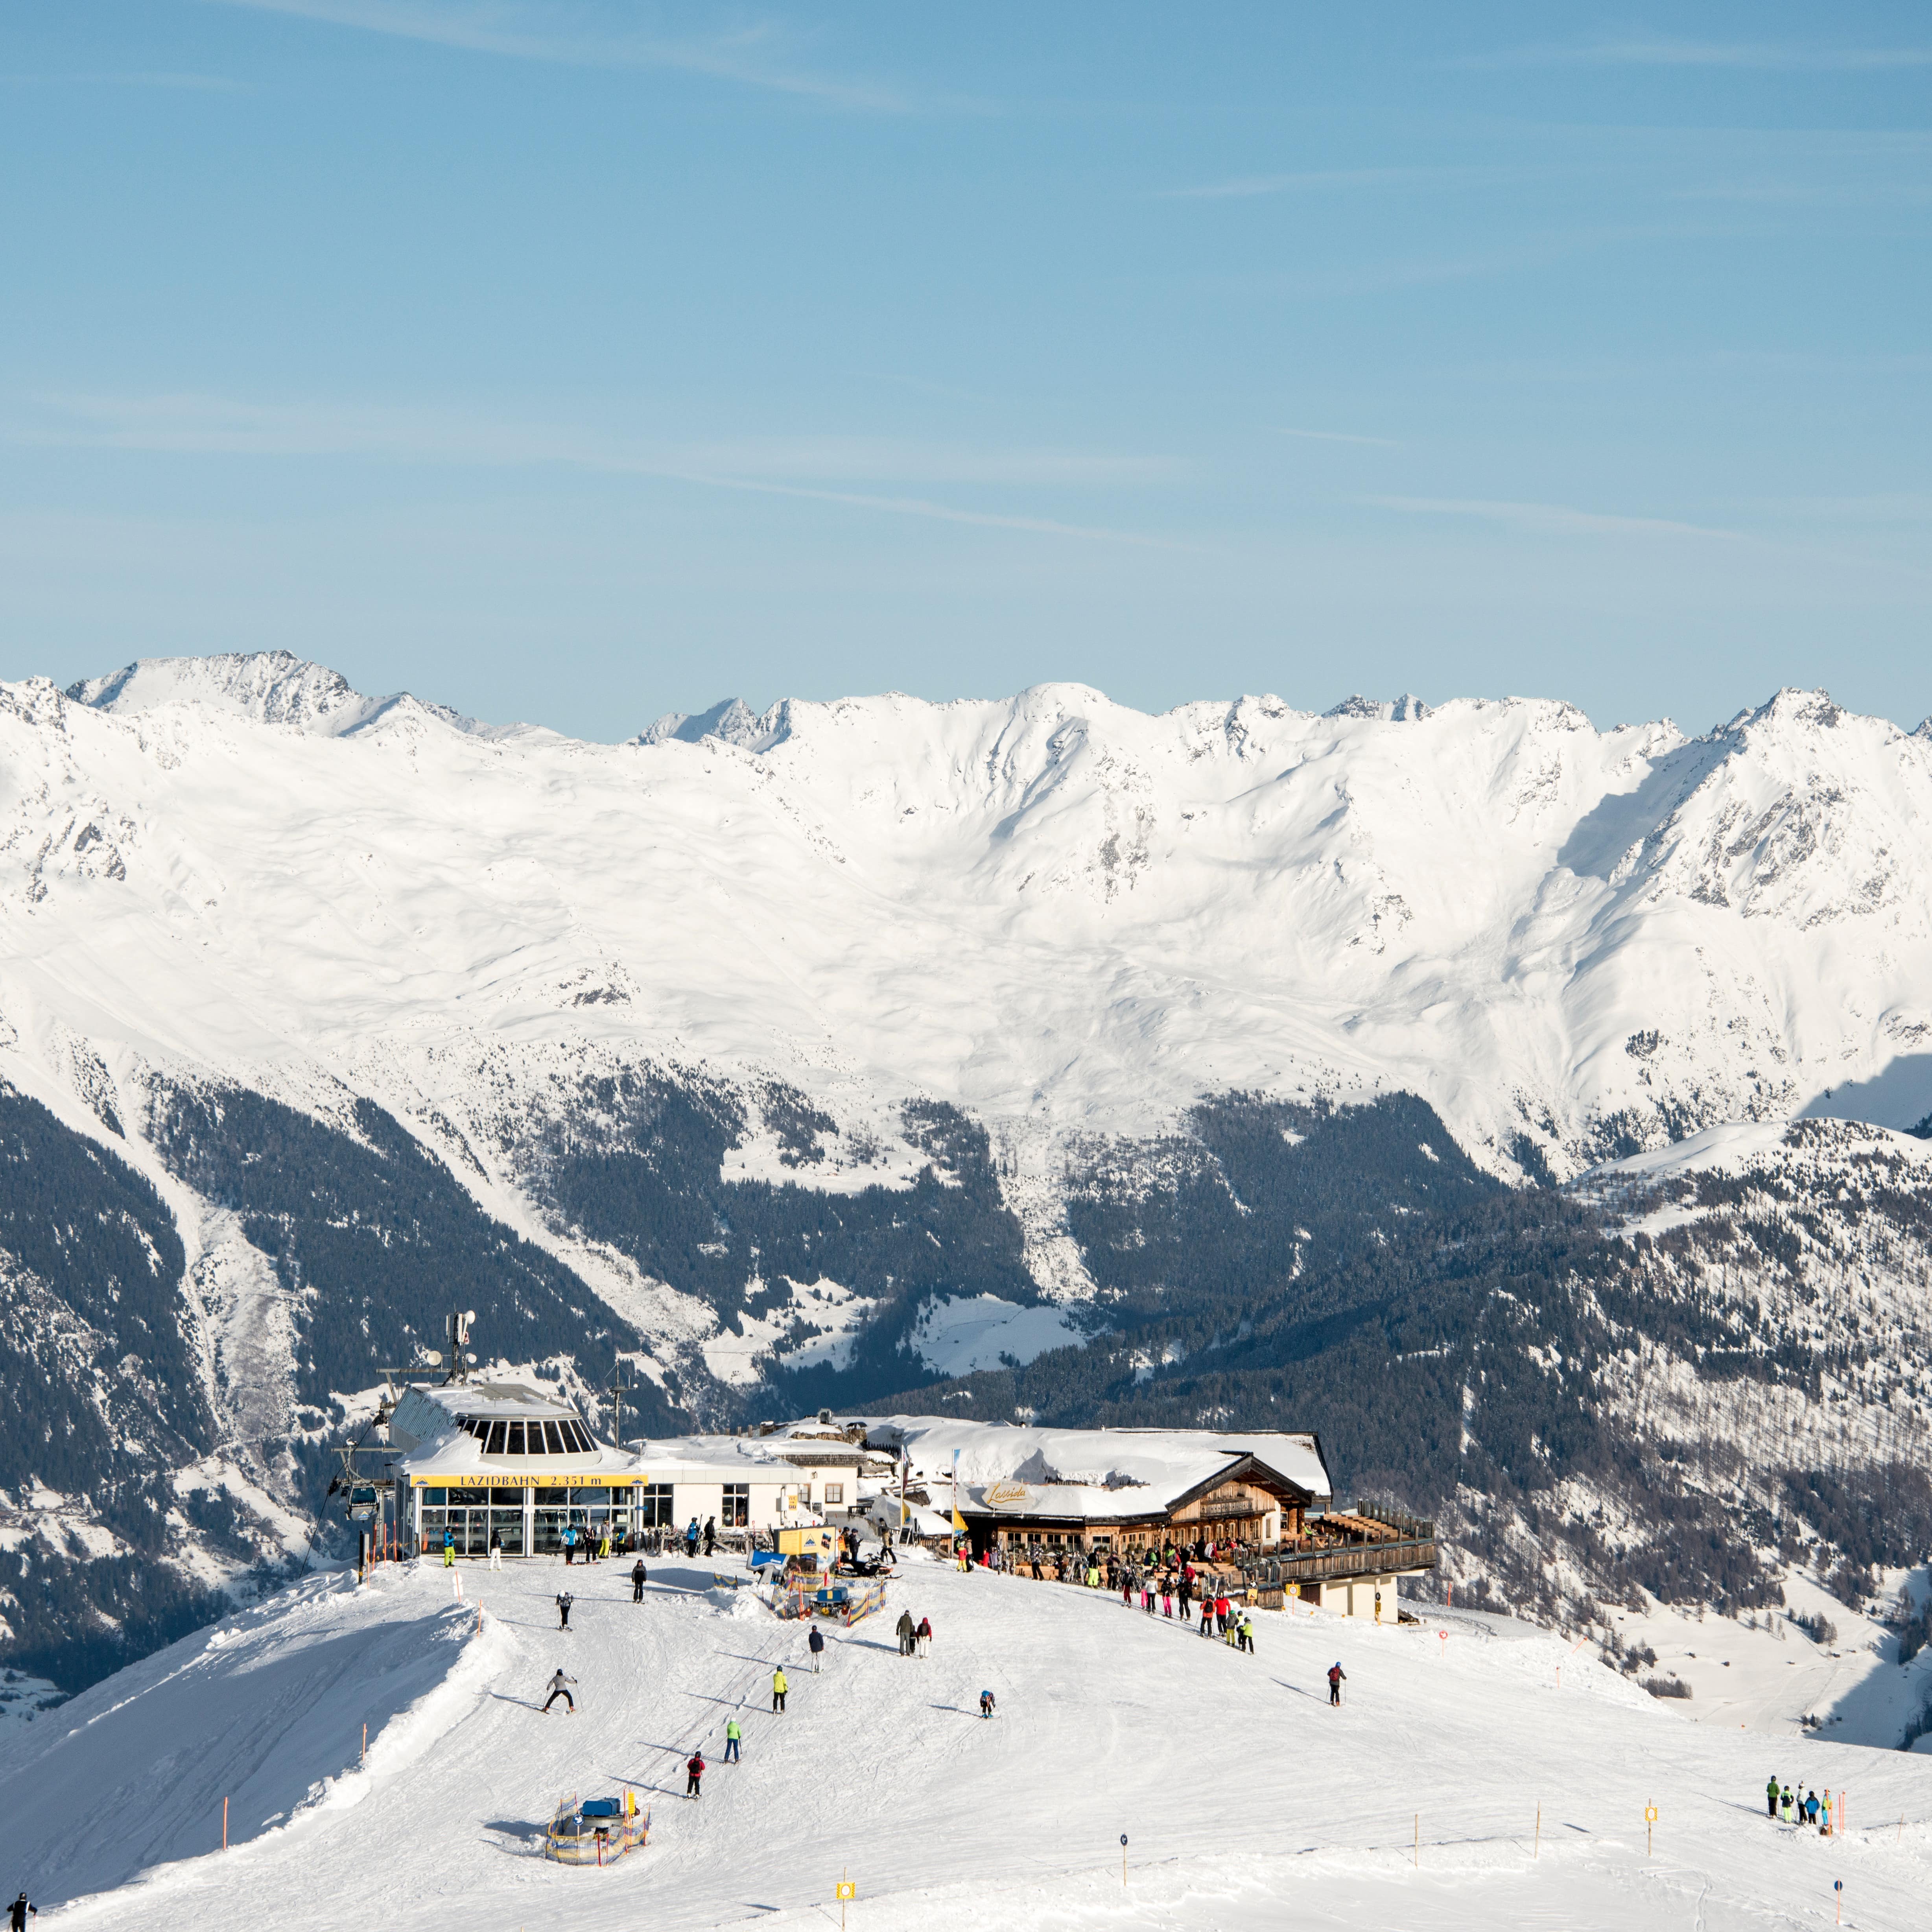 Ski resort on top of a hill surrounded by a range of snow-covered mountains